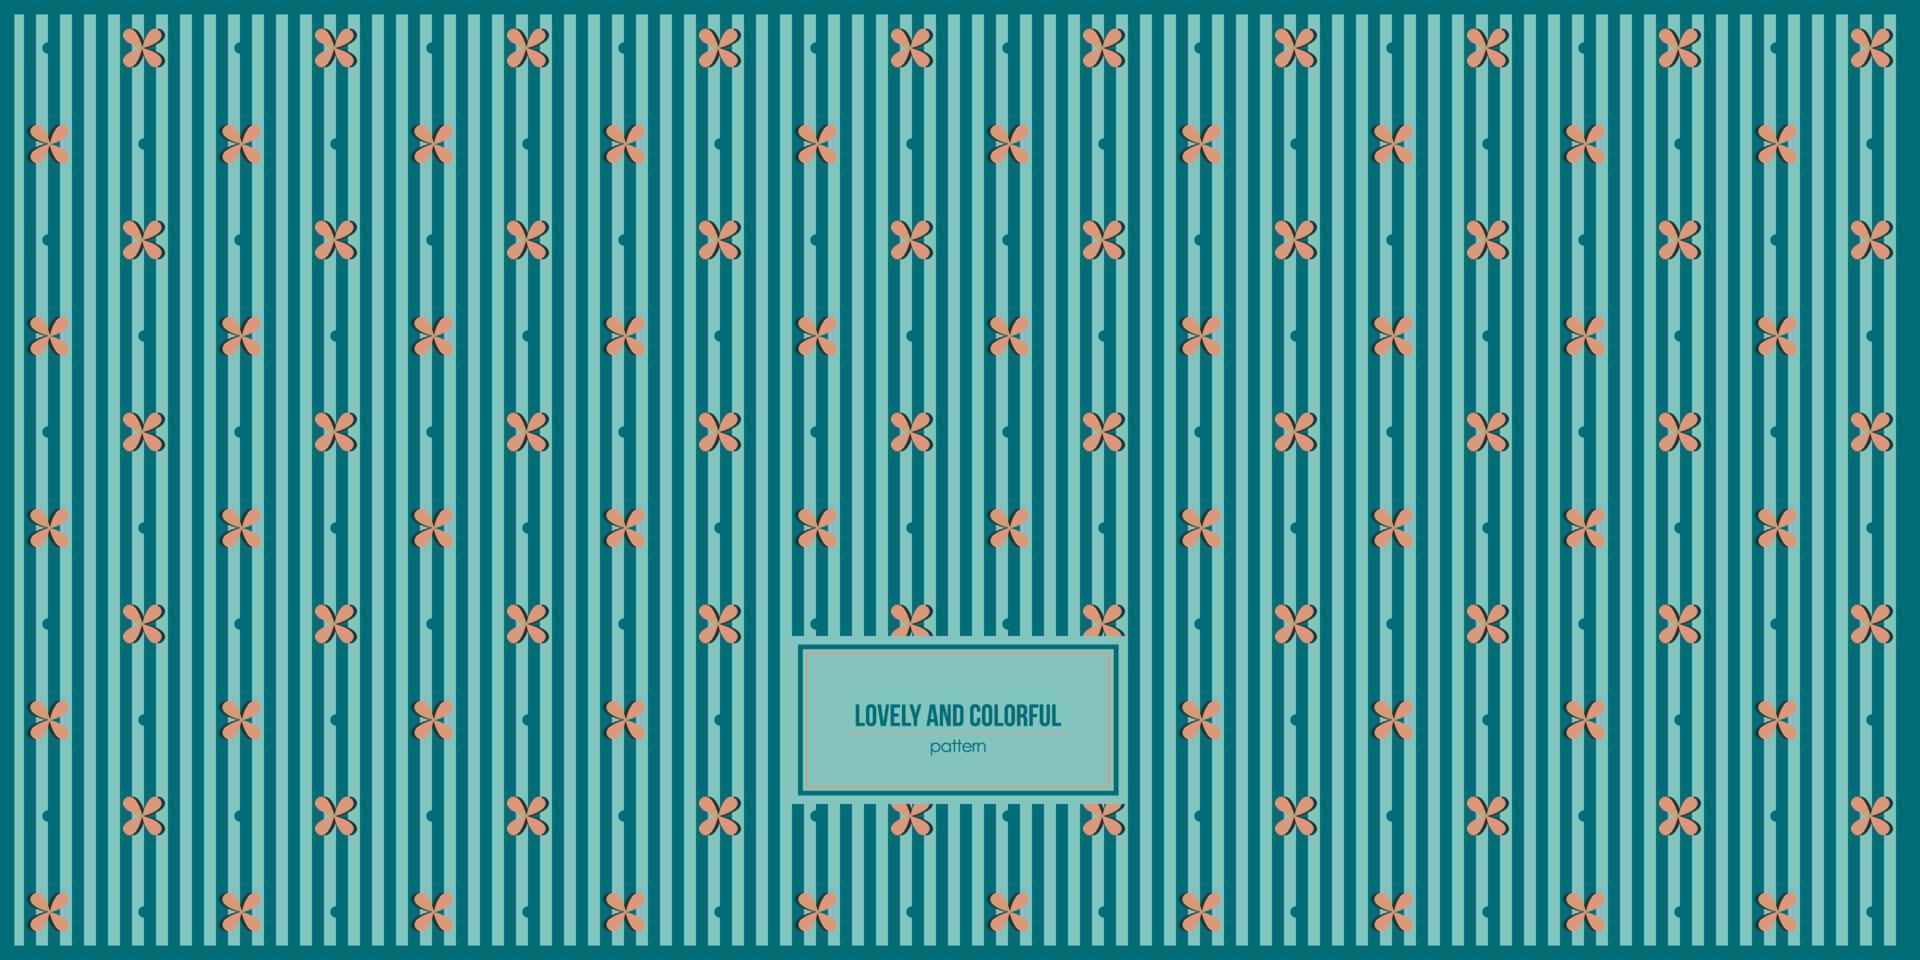 lovely and colorful flower pattern inside green stripe vector